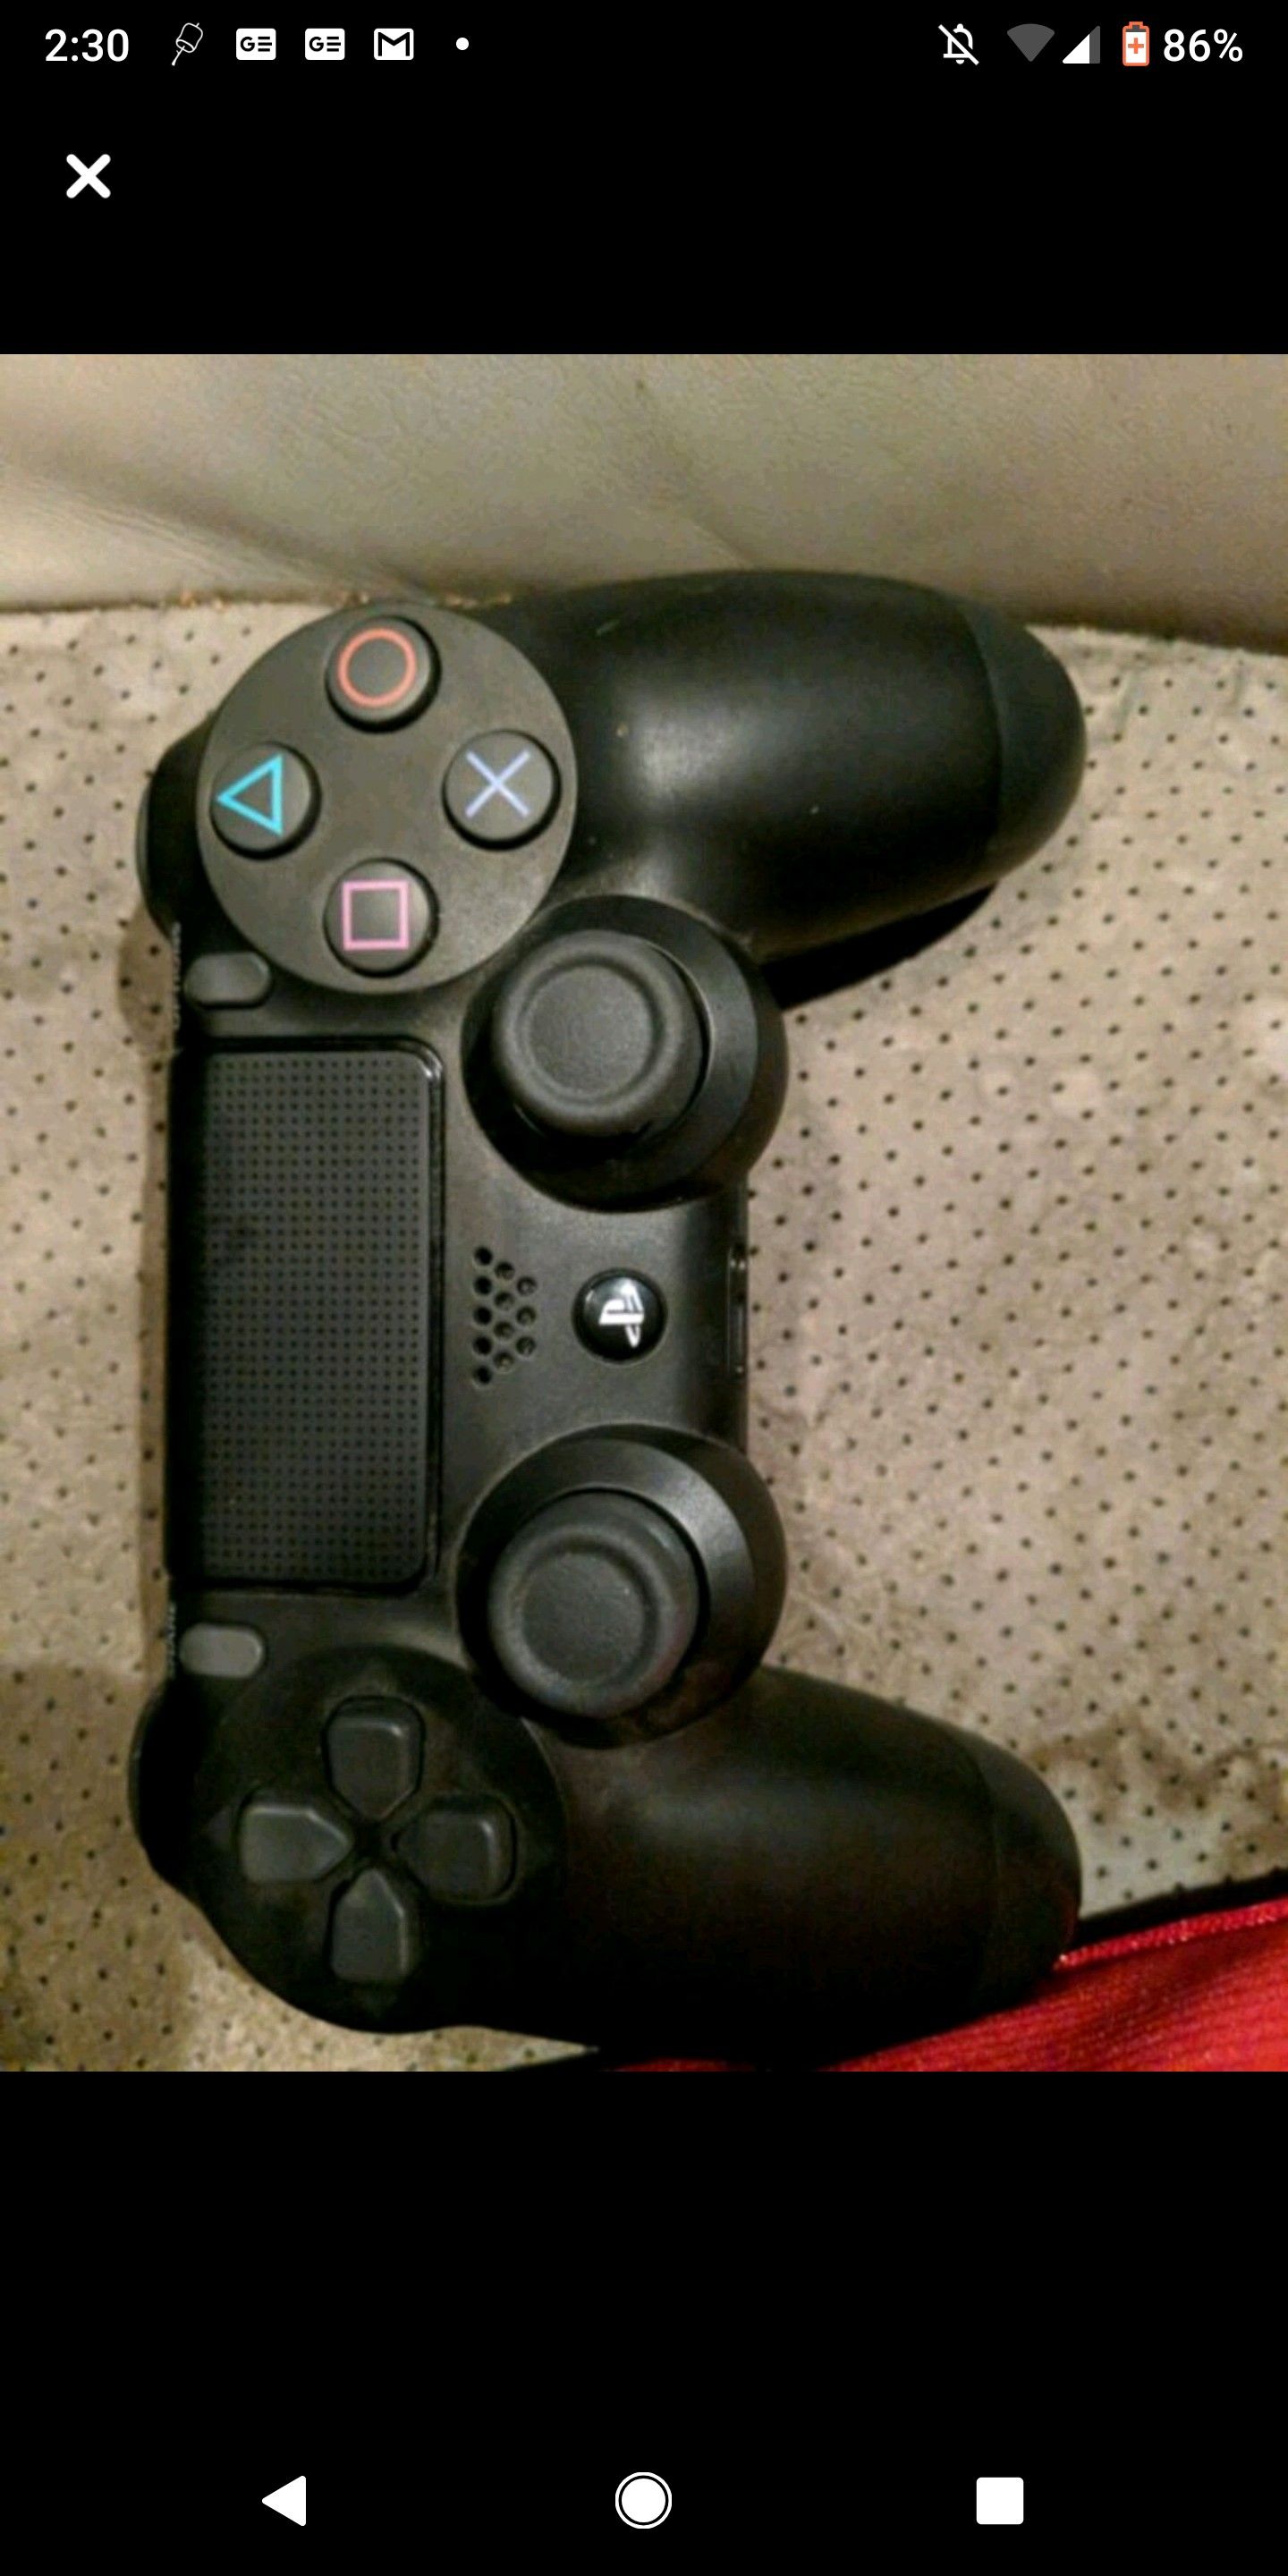 PS4 Playstation 4 Game console controller great condition OBO